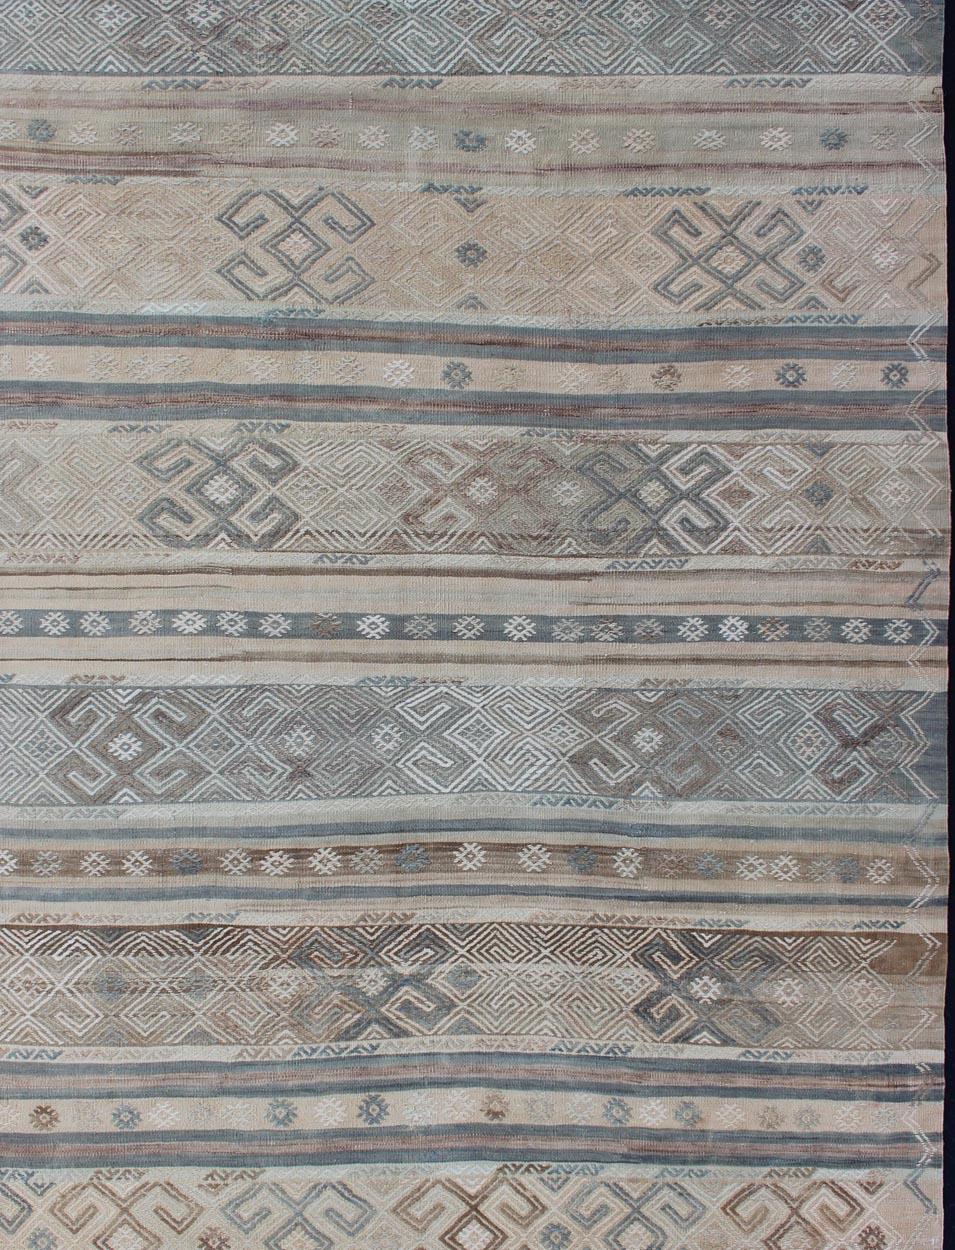 Measures: 5'9 x 7'7.

This flat-woven Kilim from Turkey features an enticing composition consisting of stripes with fascinating geometric designs rendered in natural tones of brown and gray, as well as some blue shades. 

Vintage Kilim with Stripes